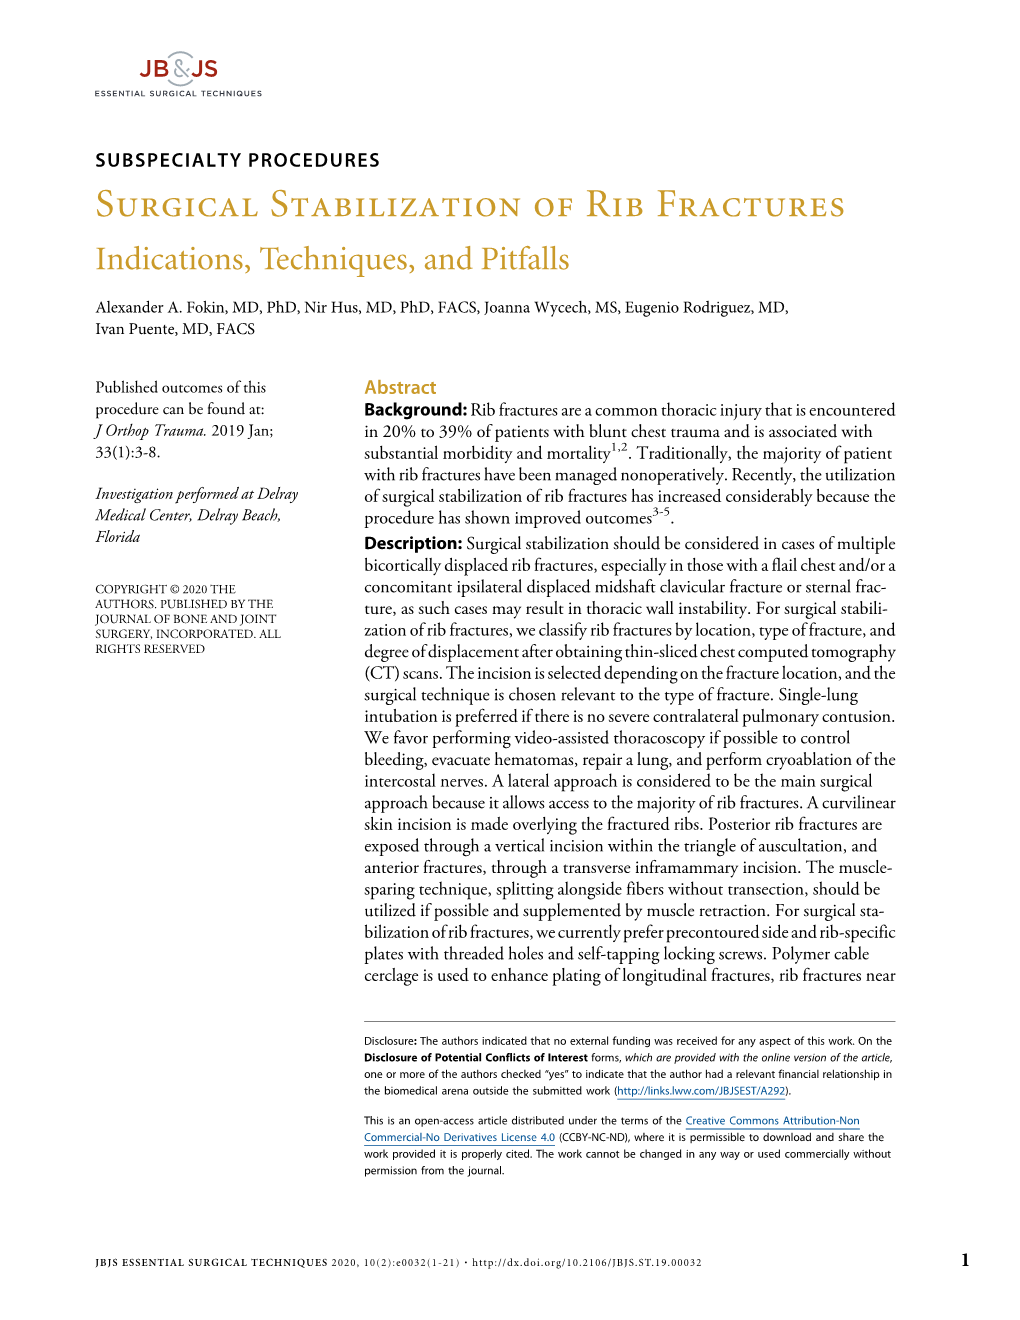 Surgical Stabilization of Rib Fractures Indications, Techniques, and Pitfalls